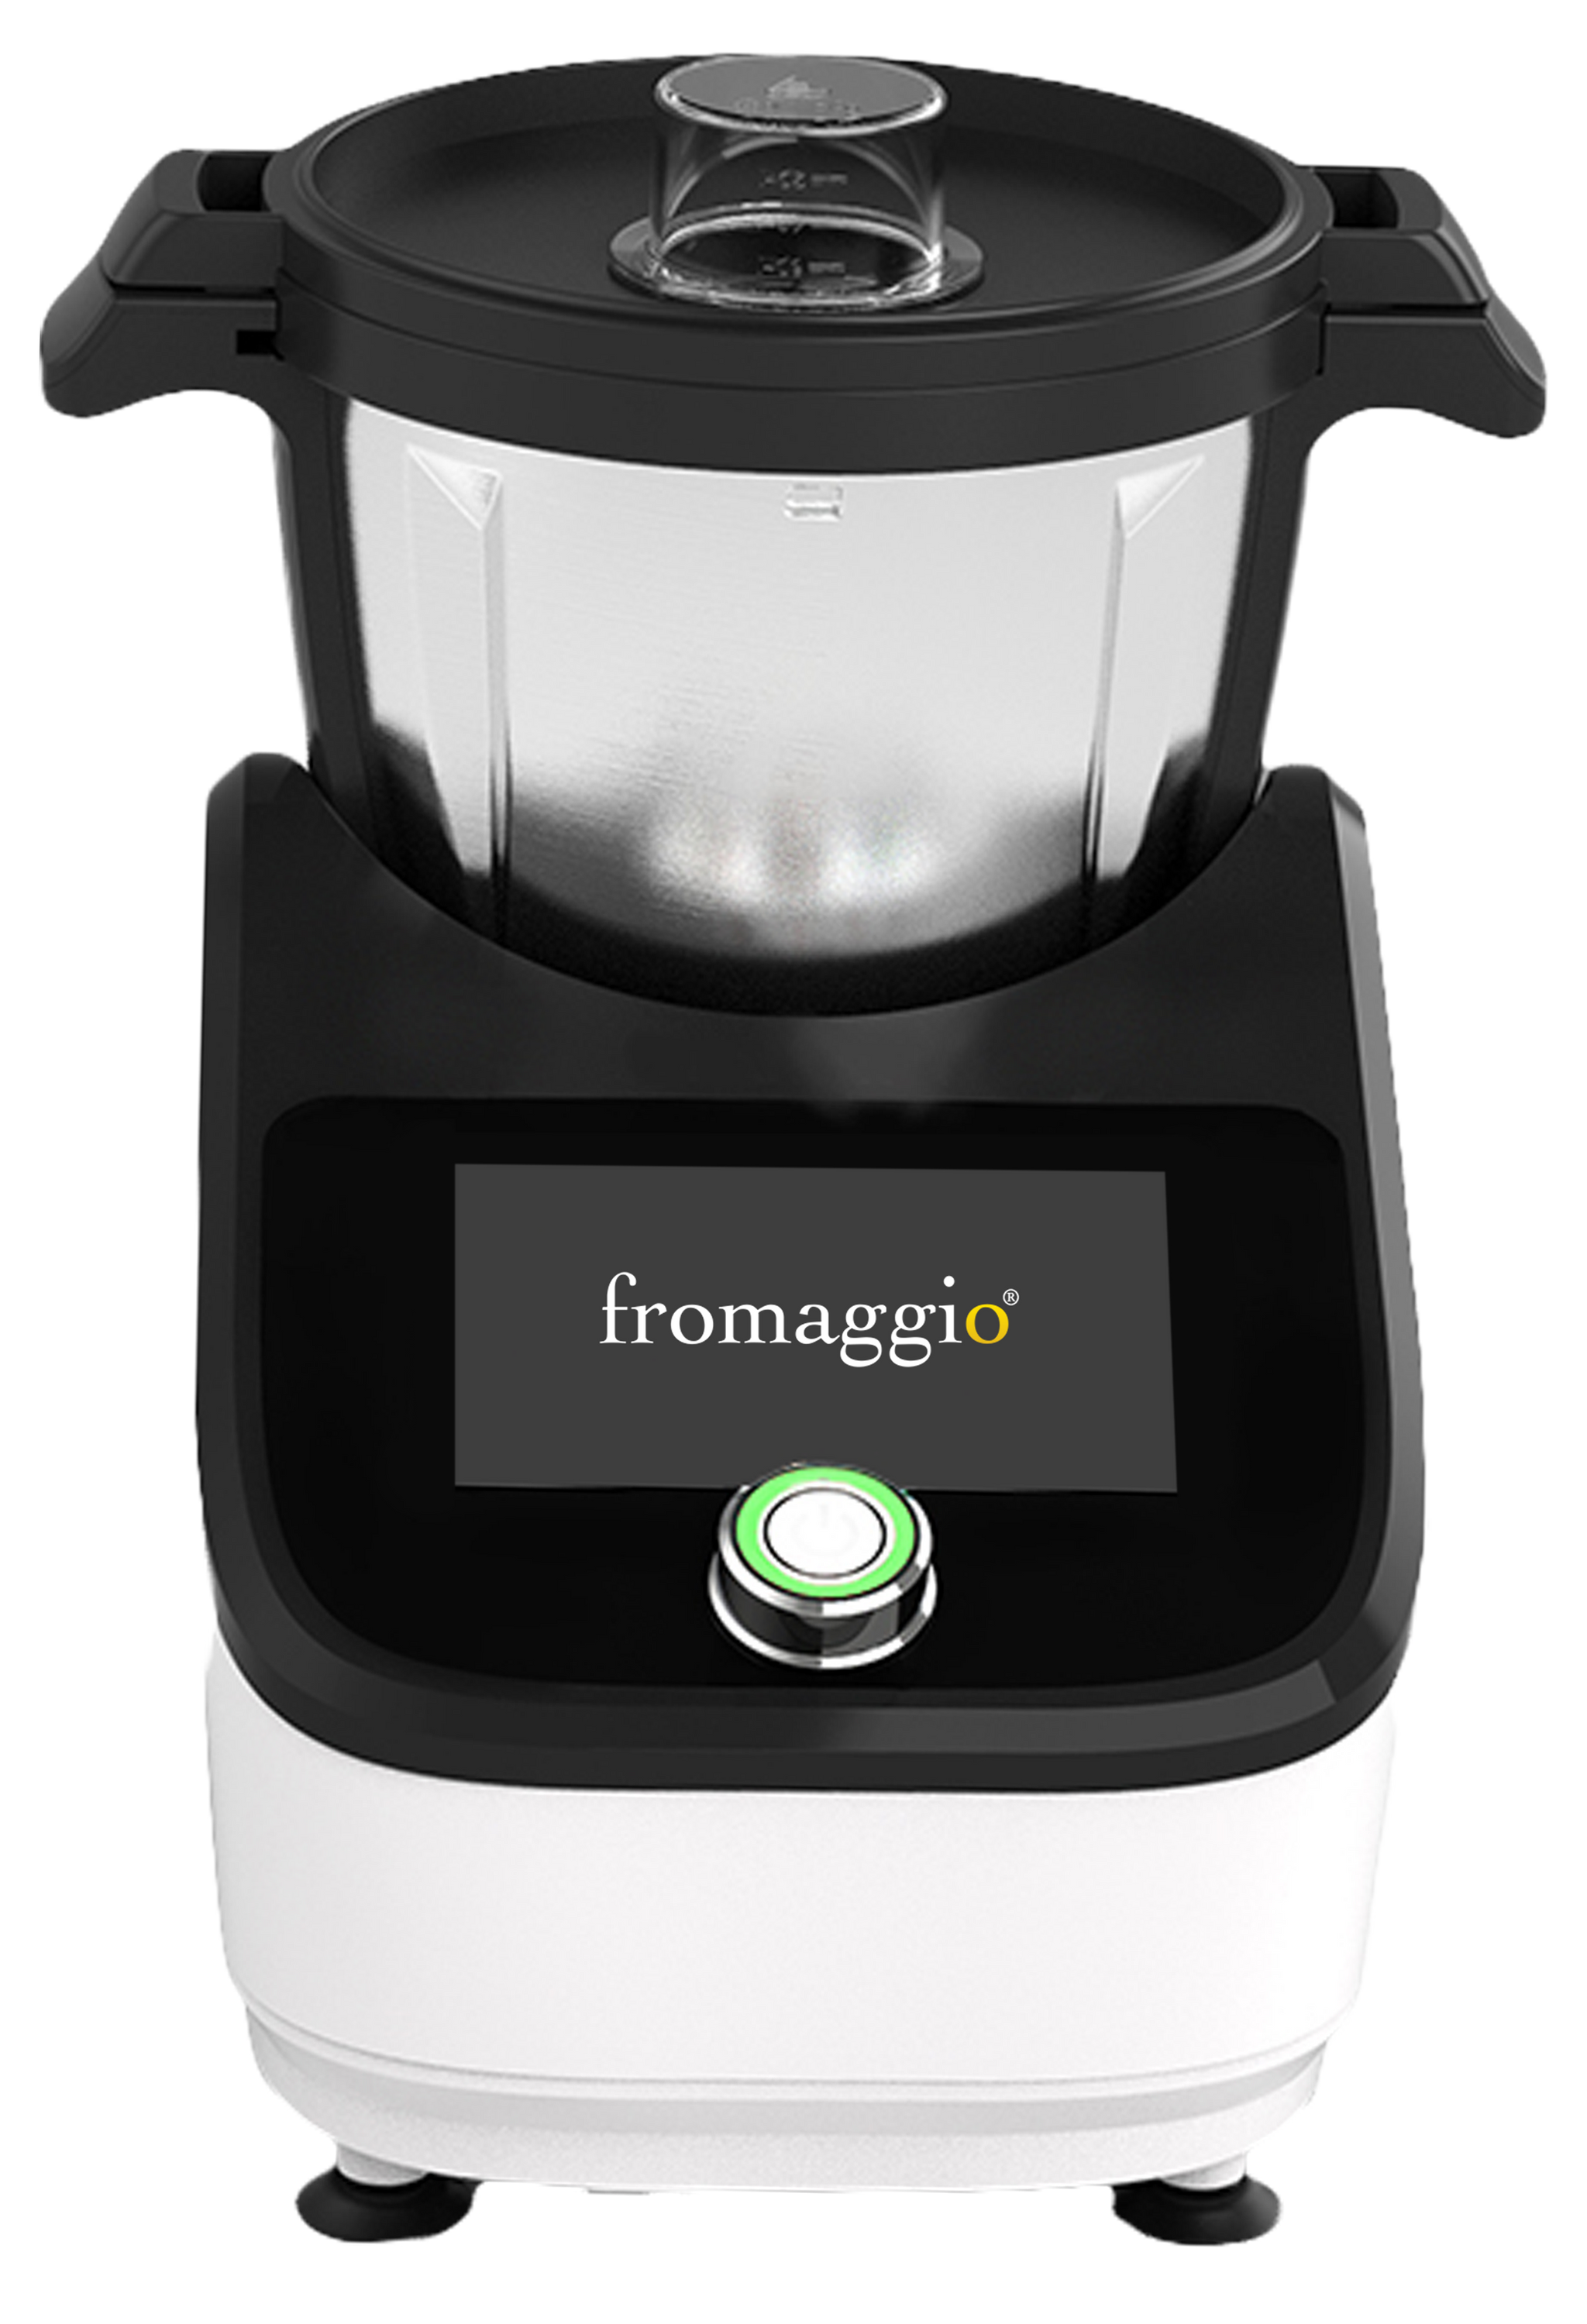 Fromaggio Cheese Maker (Stainless Steel Version)